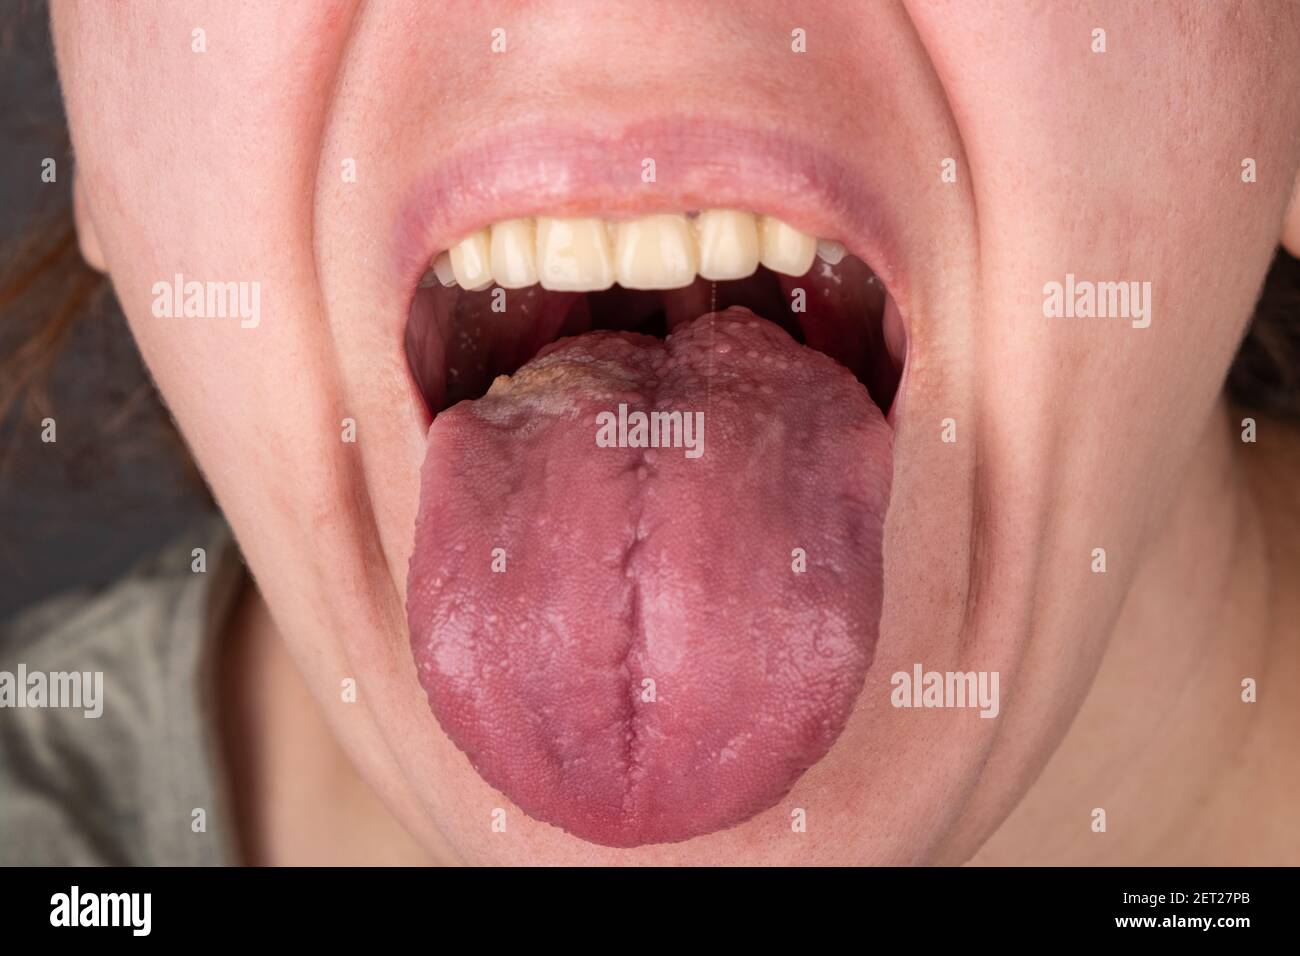 stomatitis inflammation of the tongue, cancer of the tongue Stock Photo